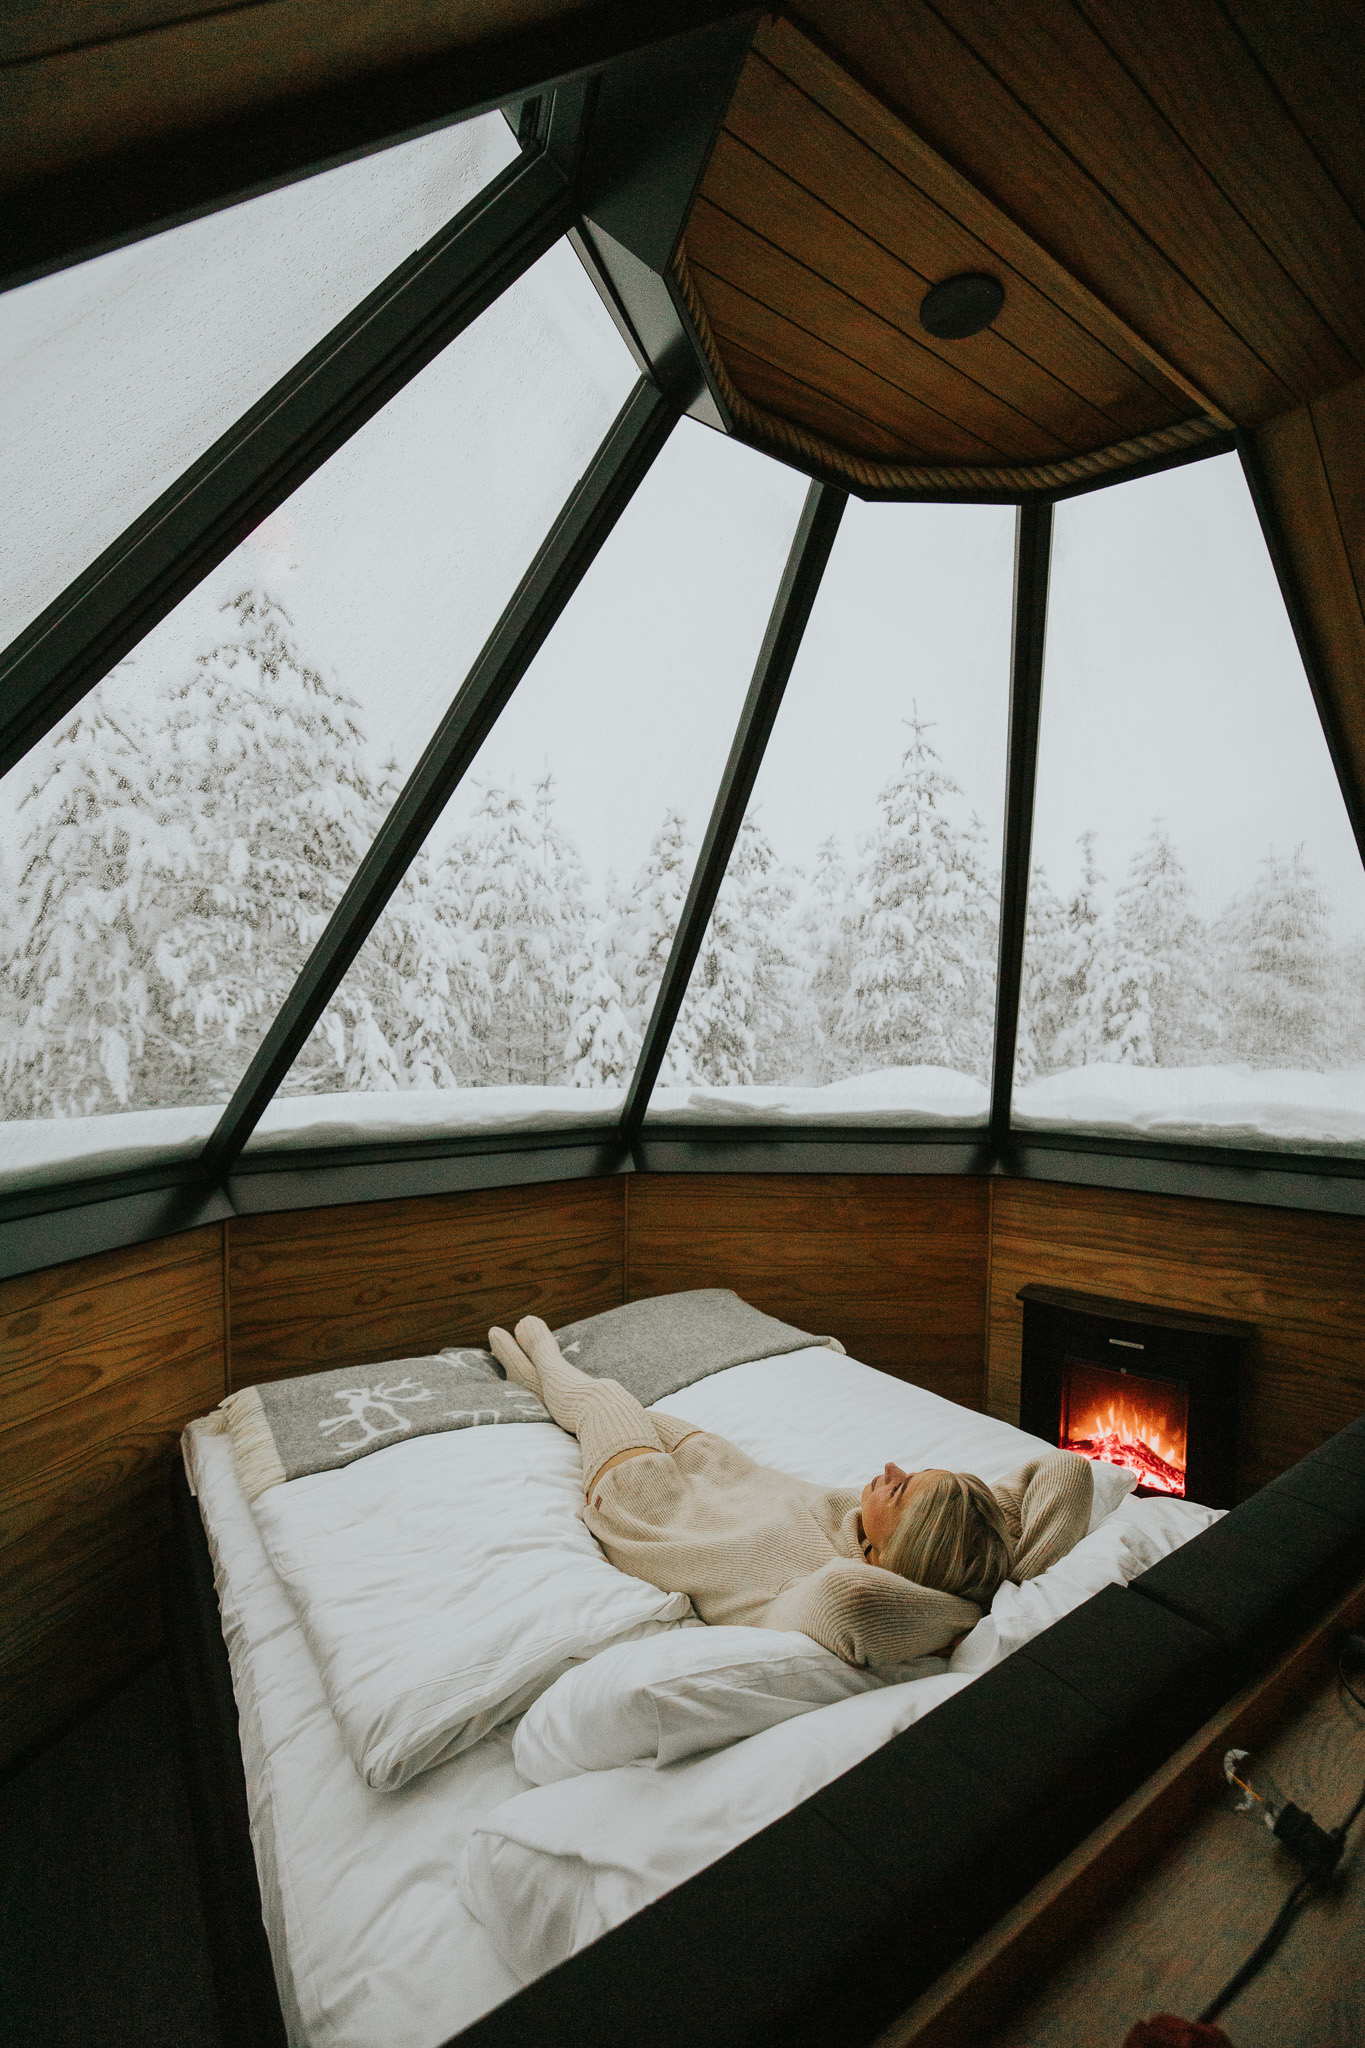 A woman laying on a bed in an aurora cabin in a snowy surroundings in Finnish Lapland.